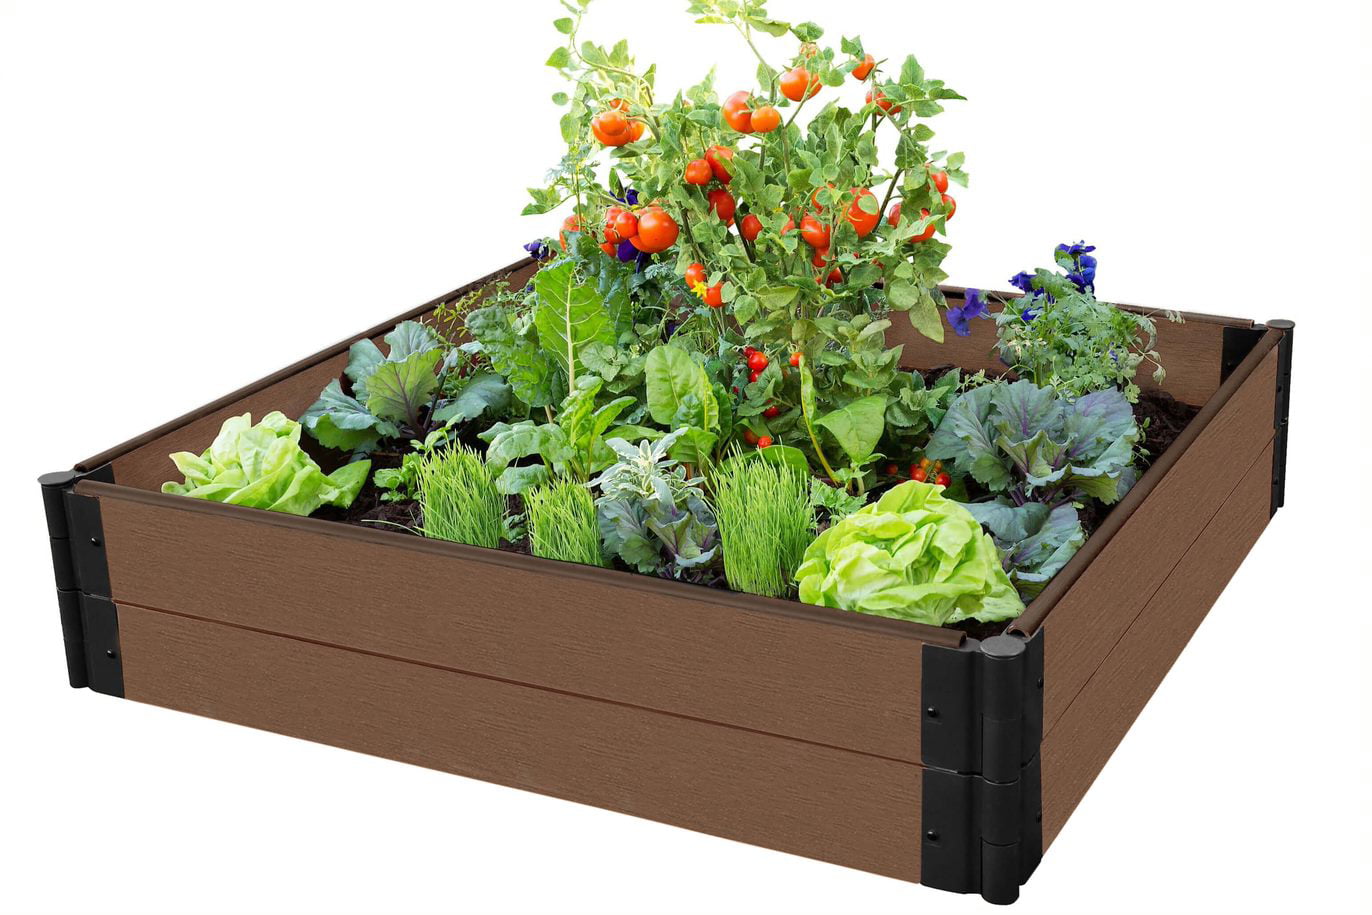 1” Profile Raised Garden Bed Frame It All 300001430 Uptown Brown x 8’ 11” 